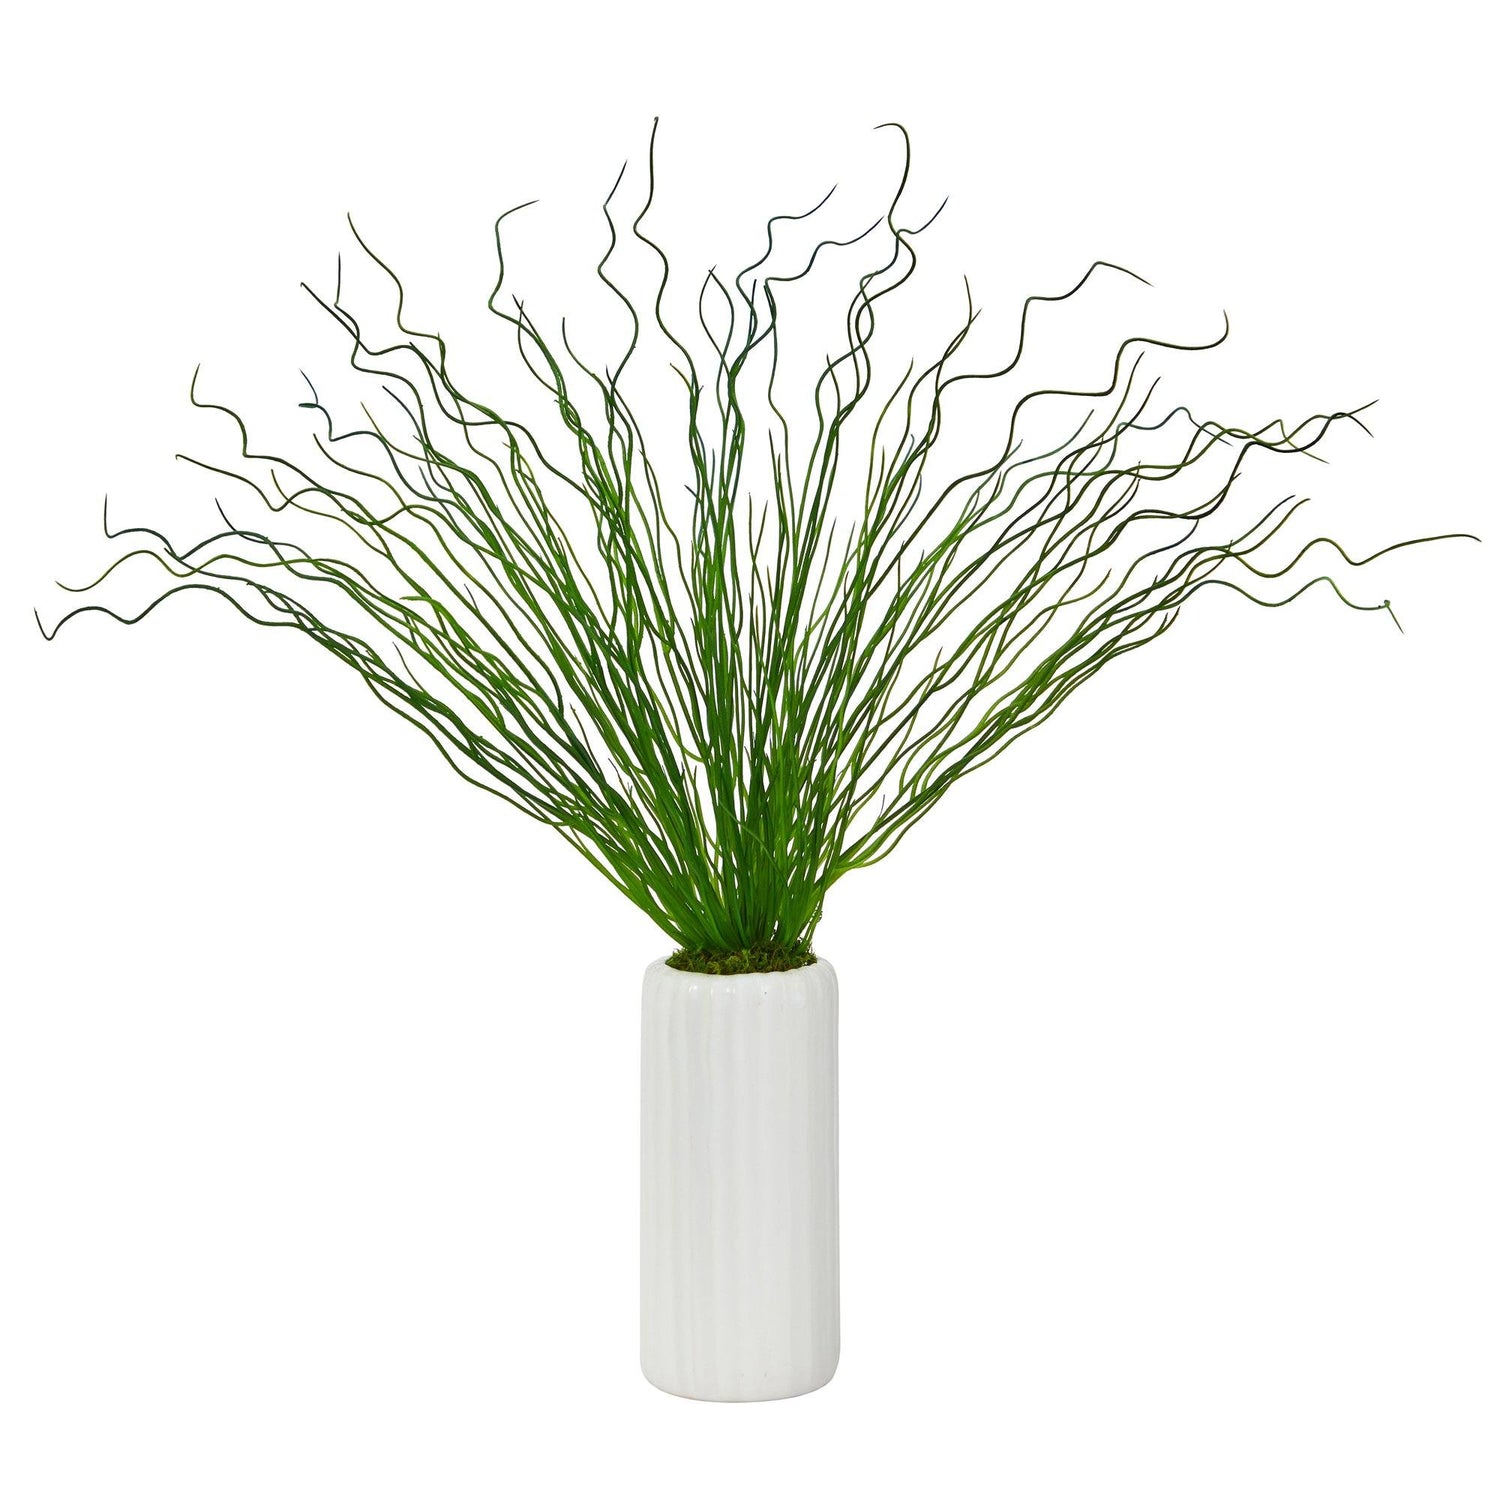 23” Curly Grass Artificial Plant in White Planter